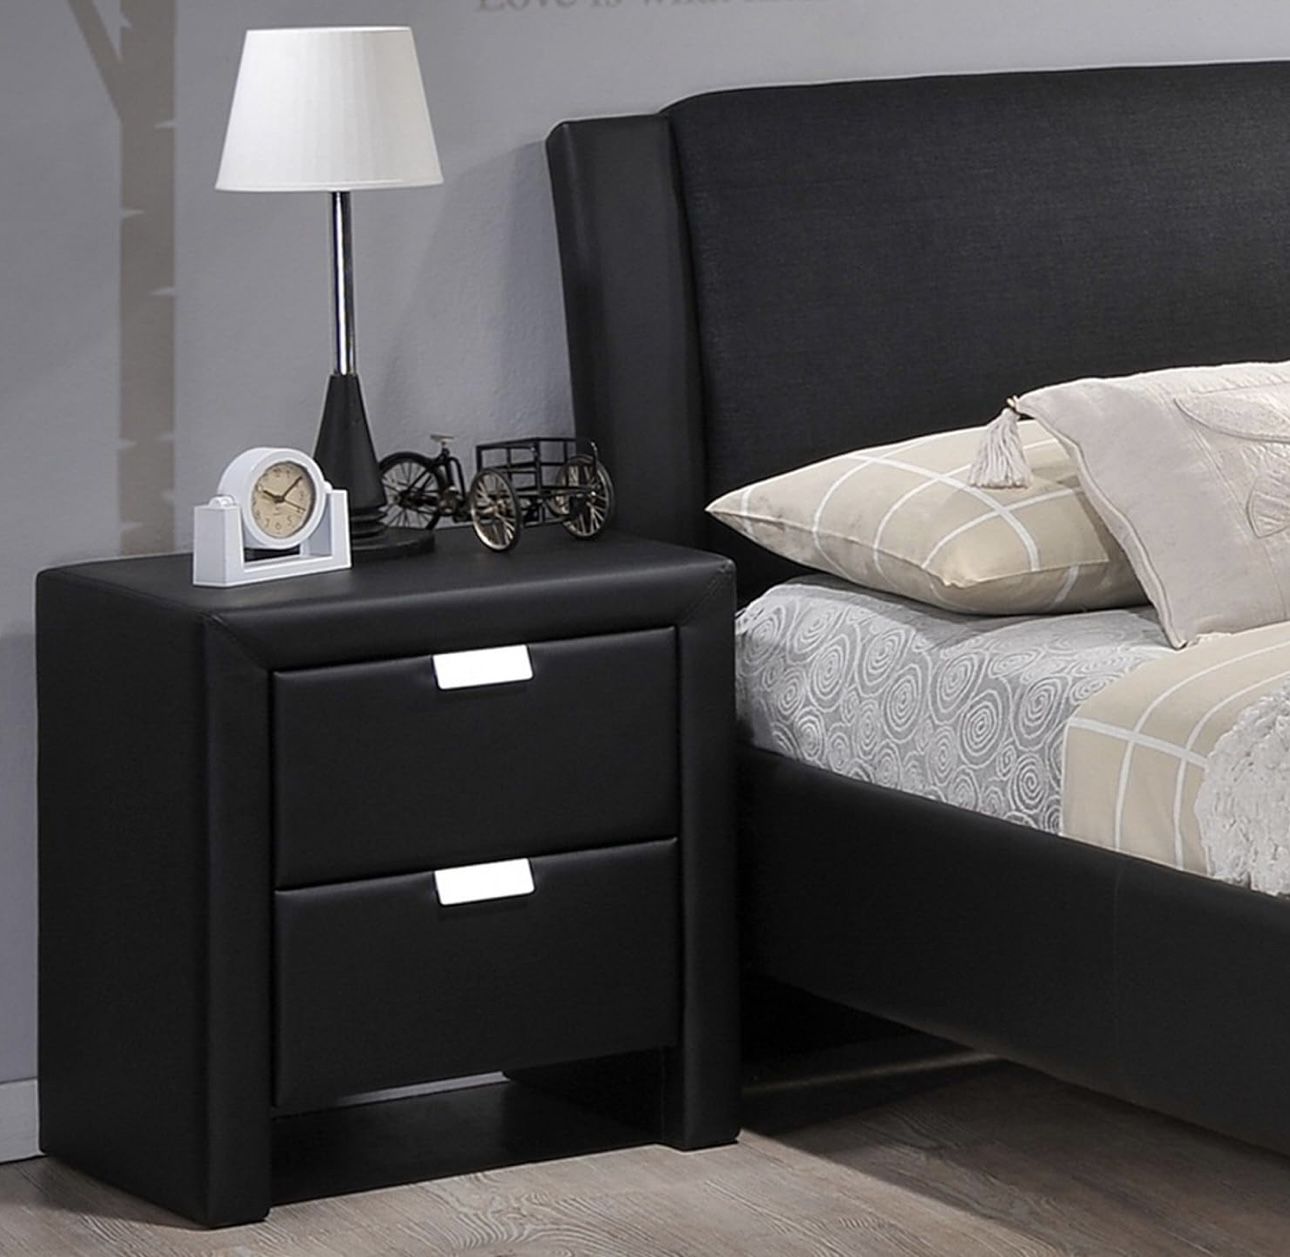 Set Of Two: Black Faux Leather Matching Nightstand Contemporary New Condition 